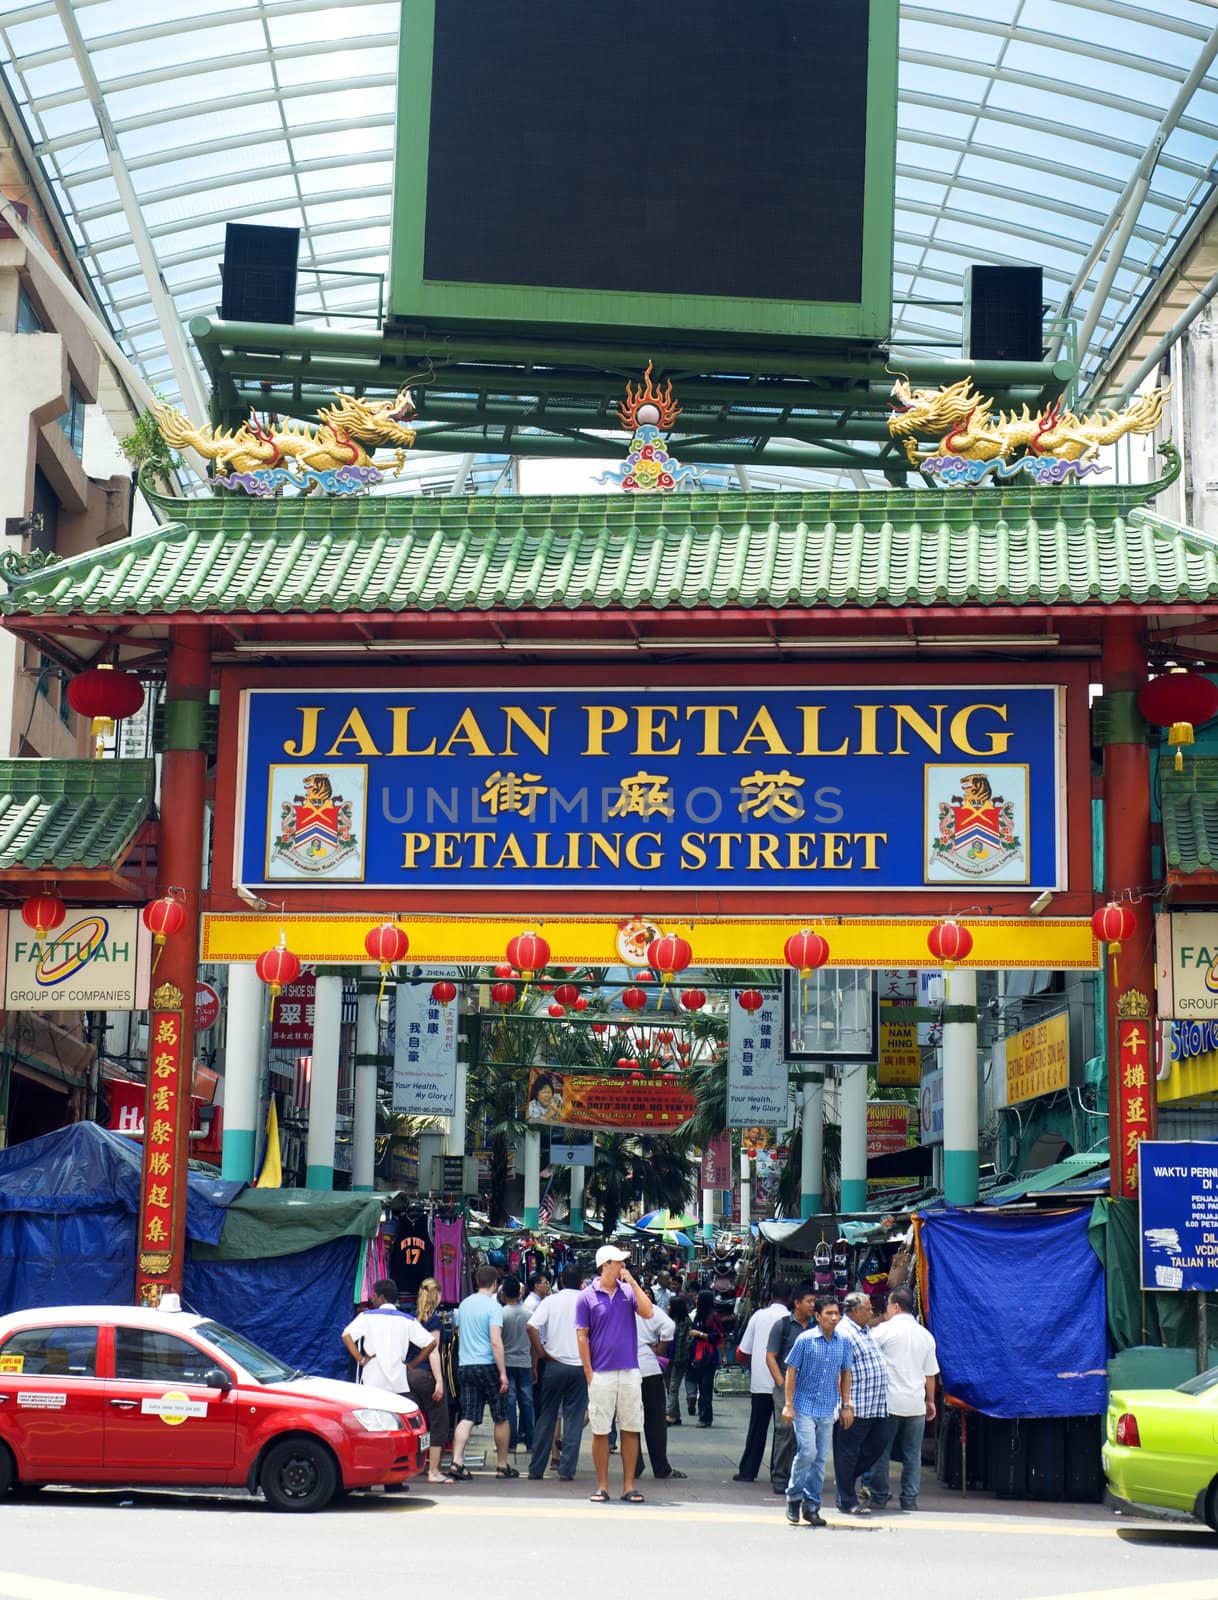 Kuala Lumpur, Malaysia - March 20, 2011: Petaling Street in Kuala Lumpur . The street is a long market which specialises in counterfeit clothes, watches and shoes. Famous tourist attraction